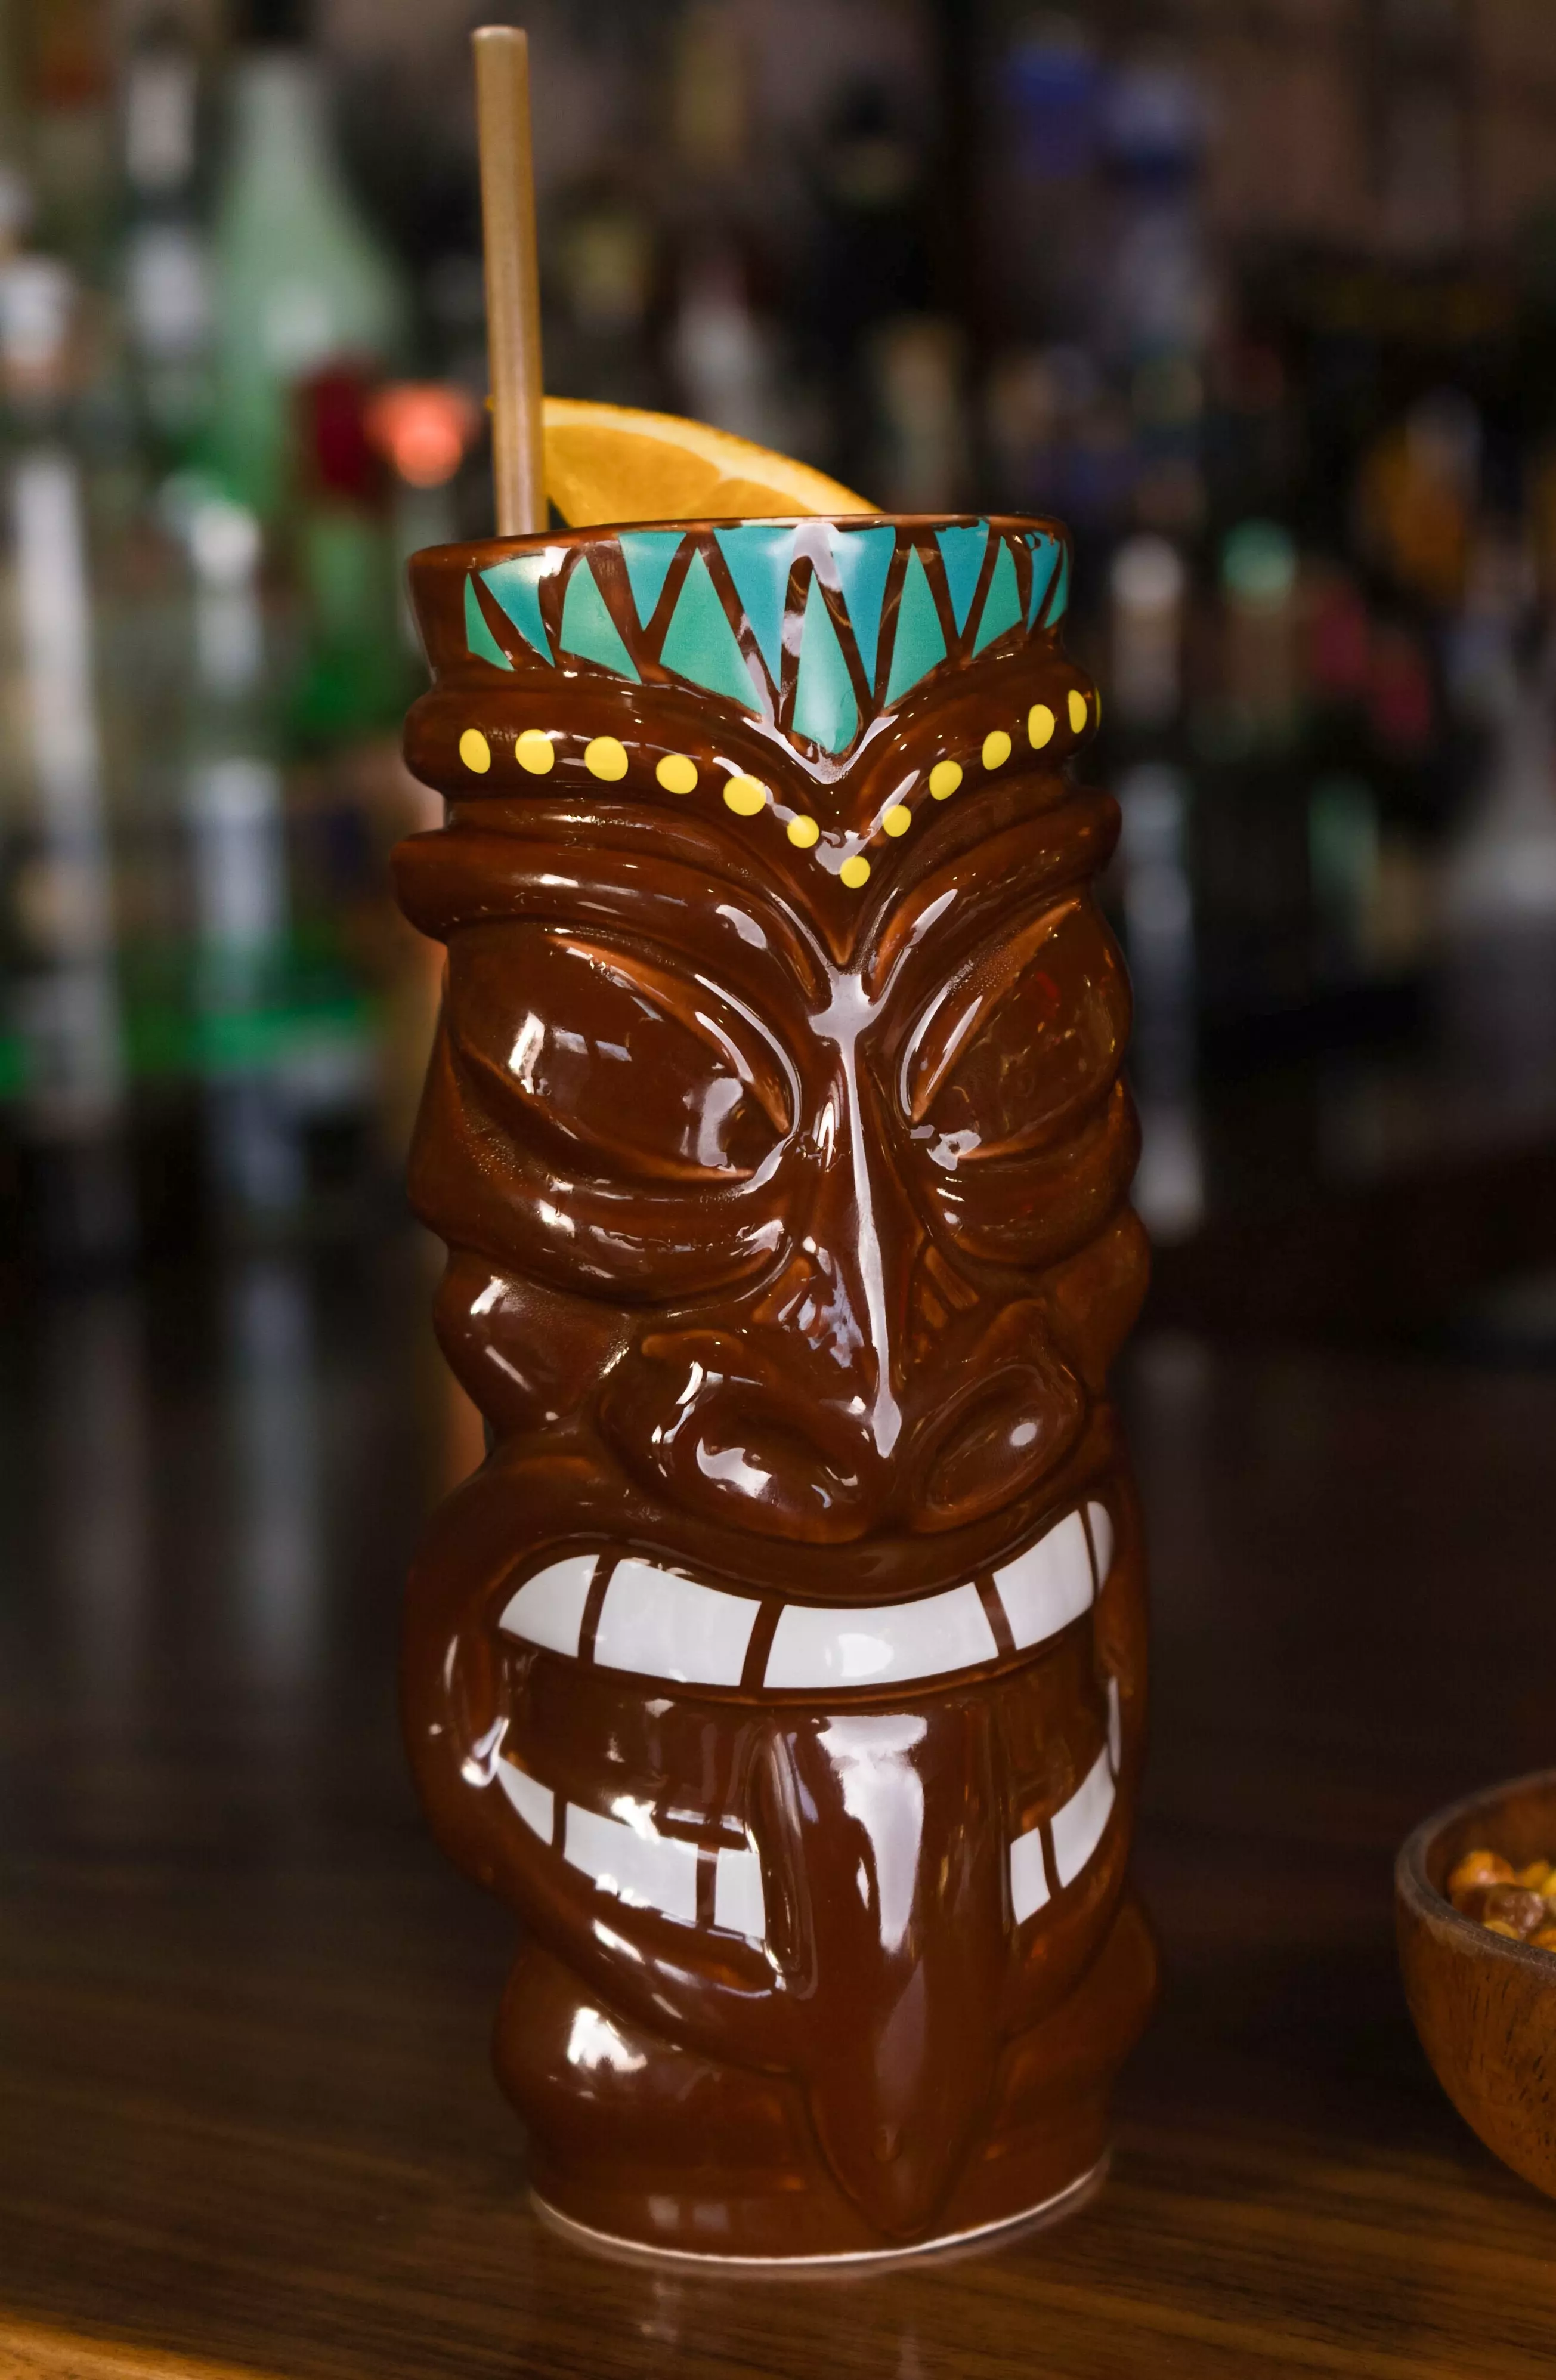 Drink in a tiki doll glass